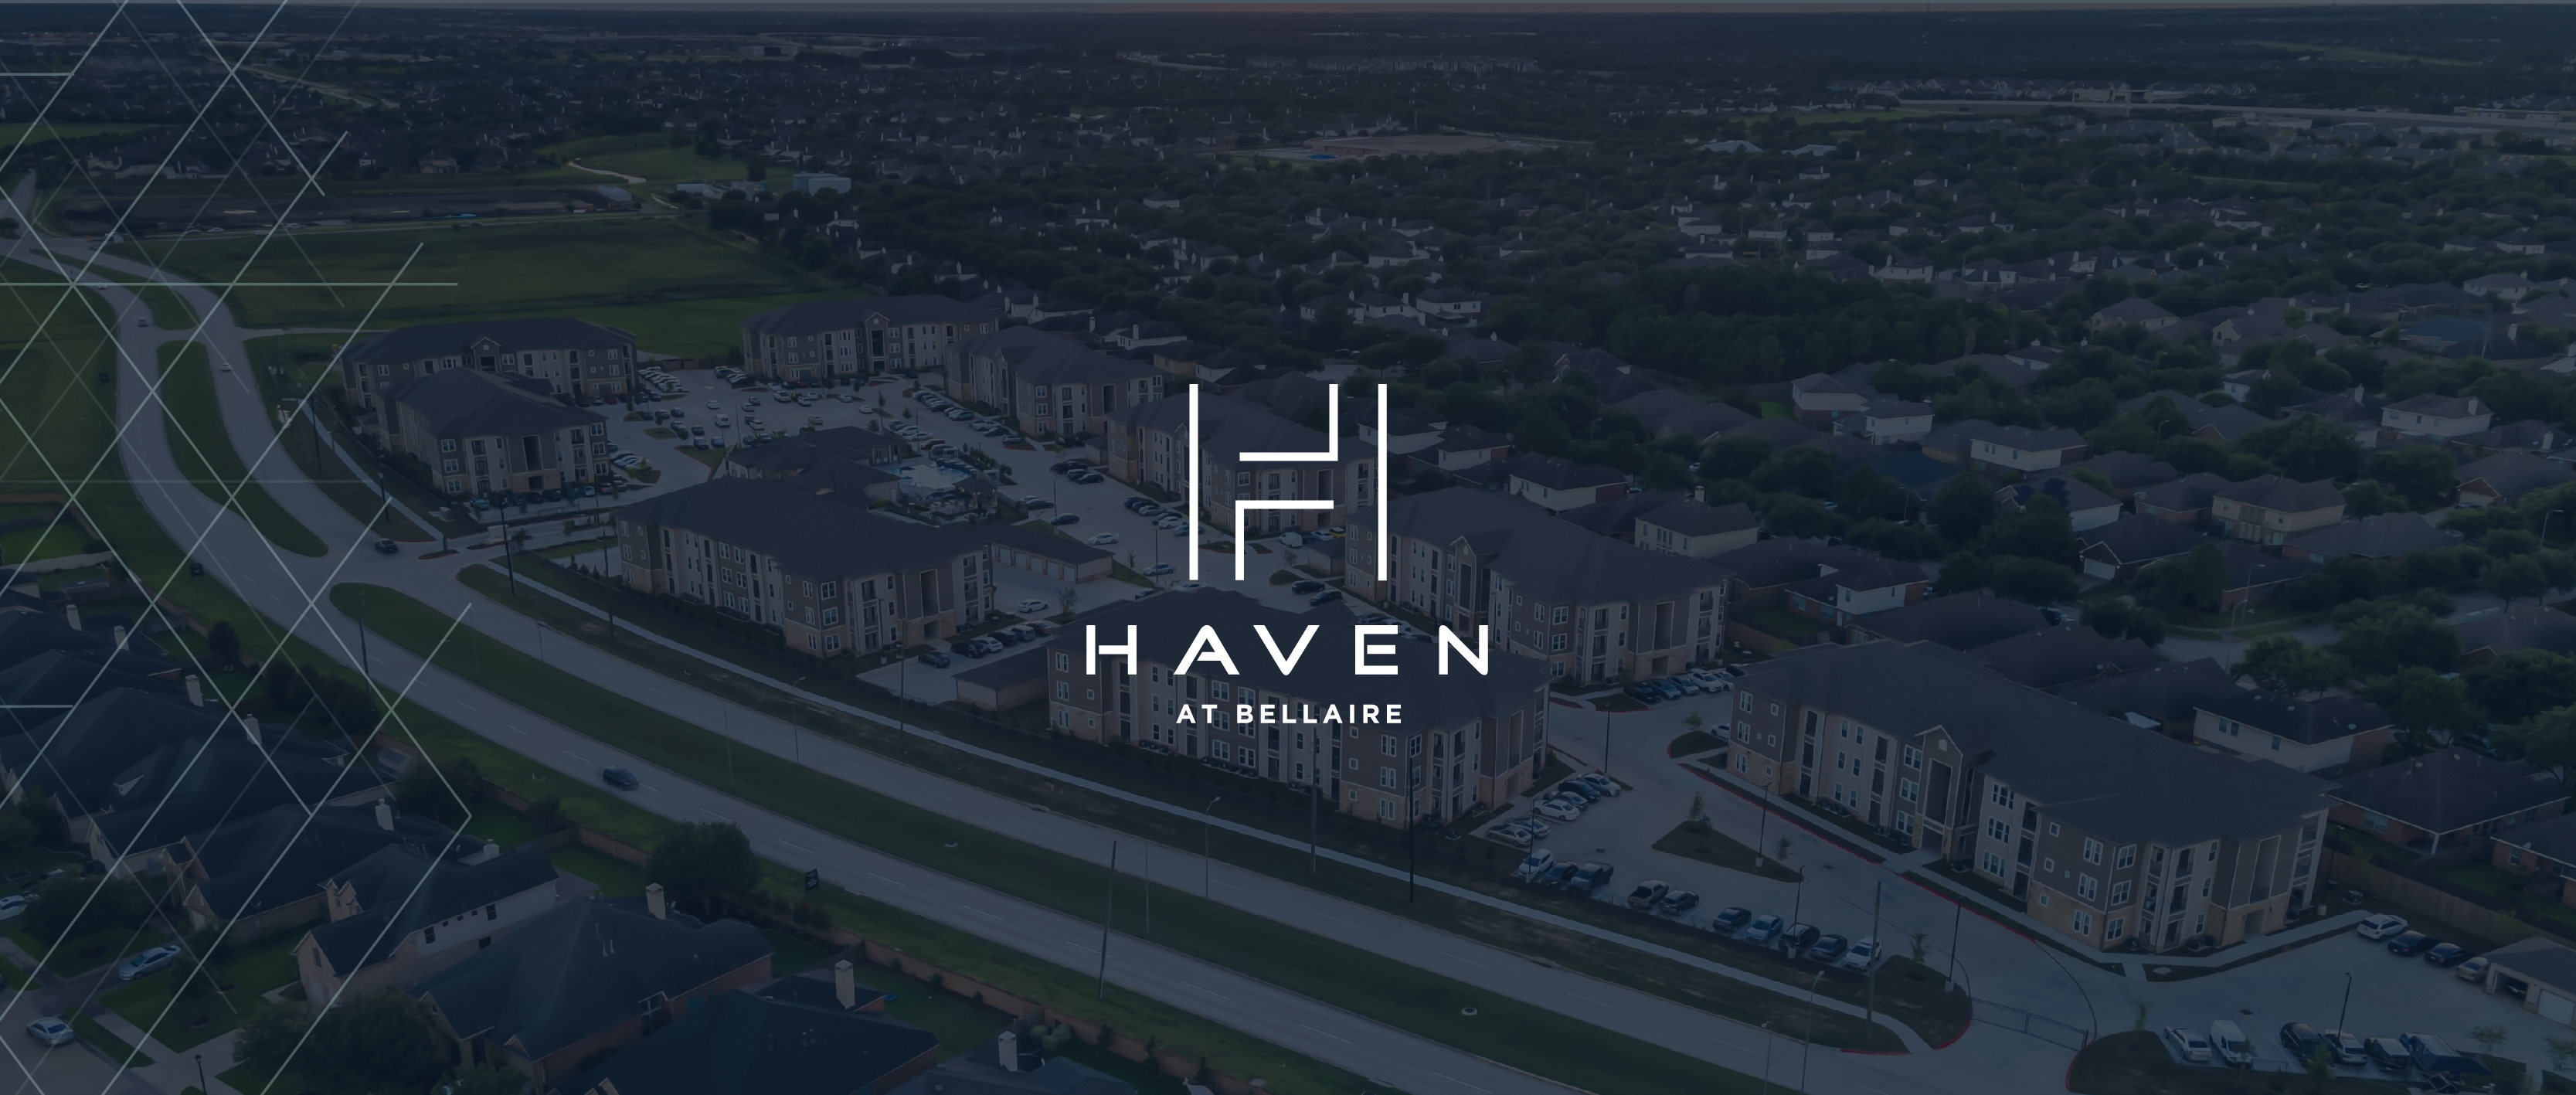 Haven At Bellaire Apartments Logo Over Building Rendering